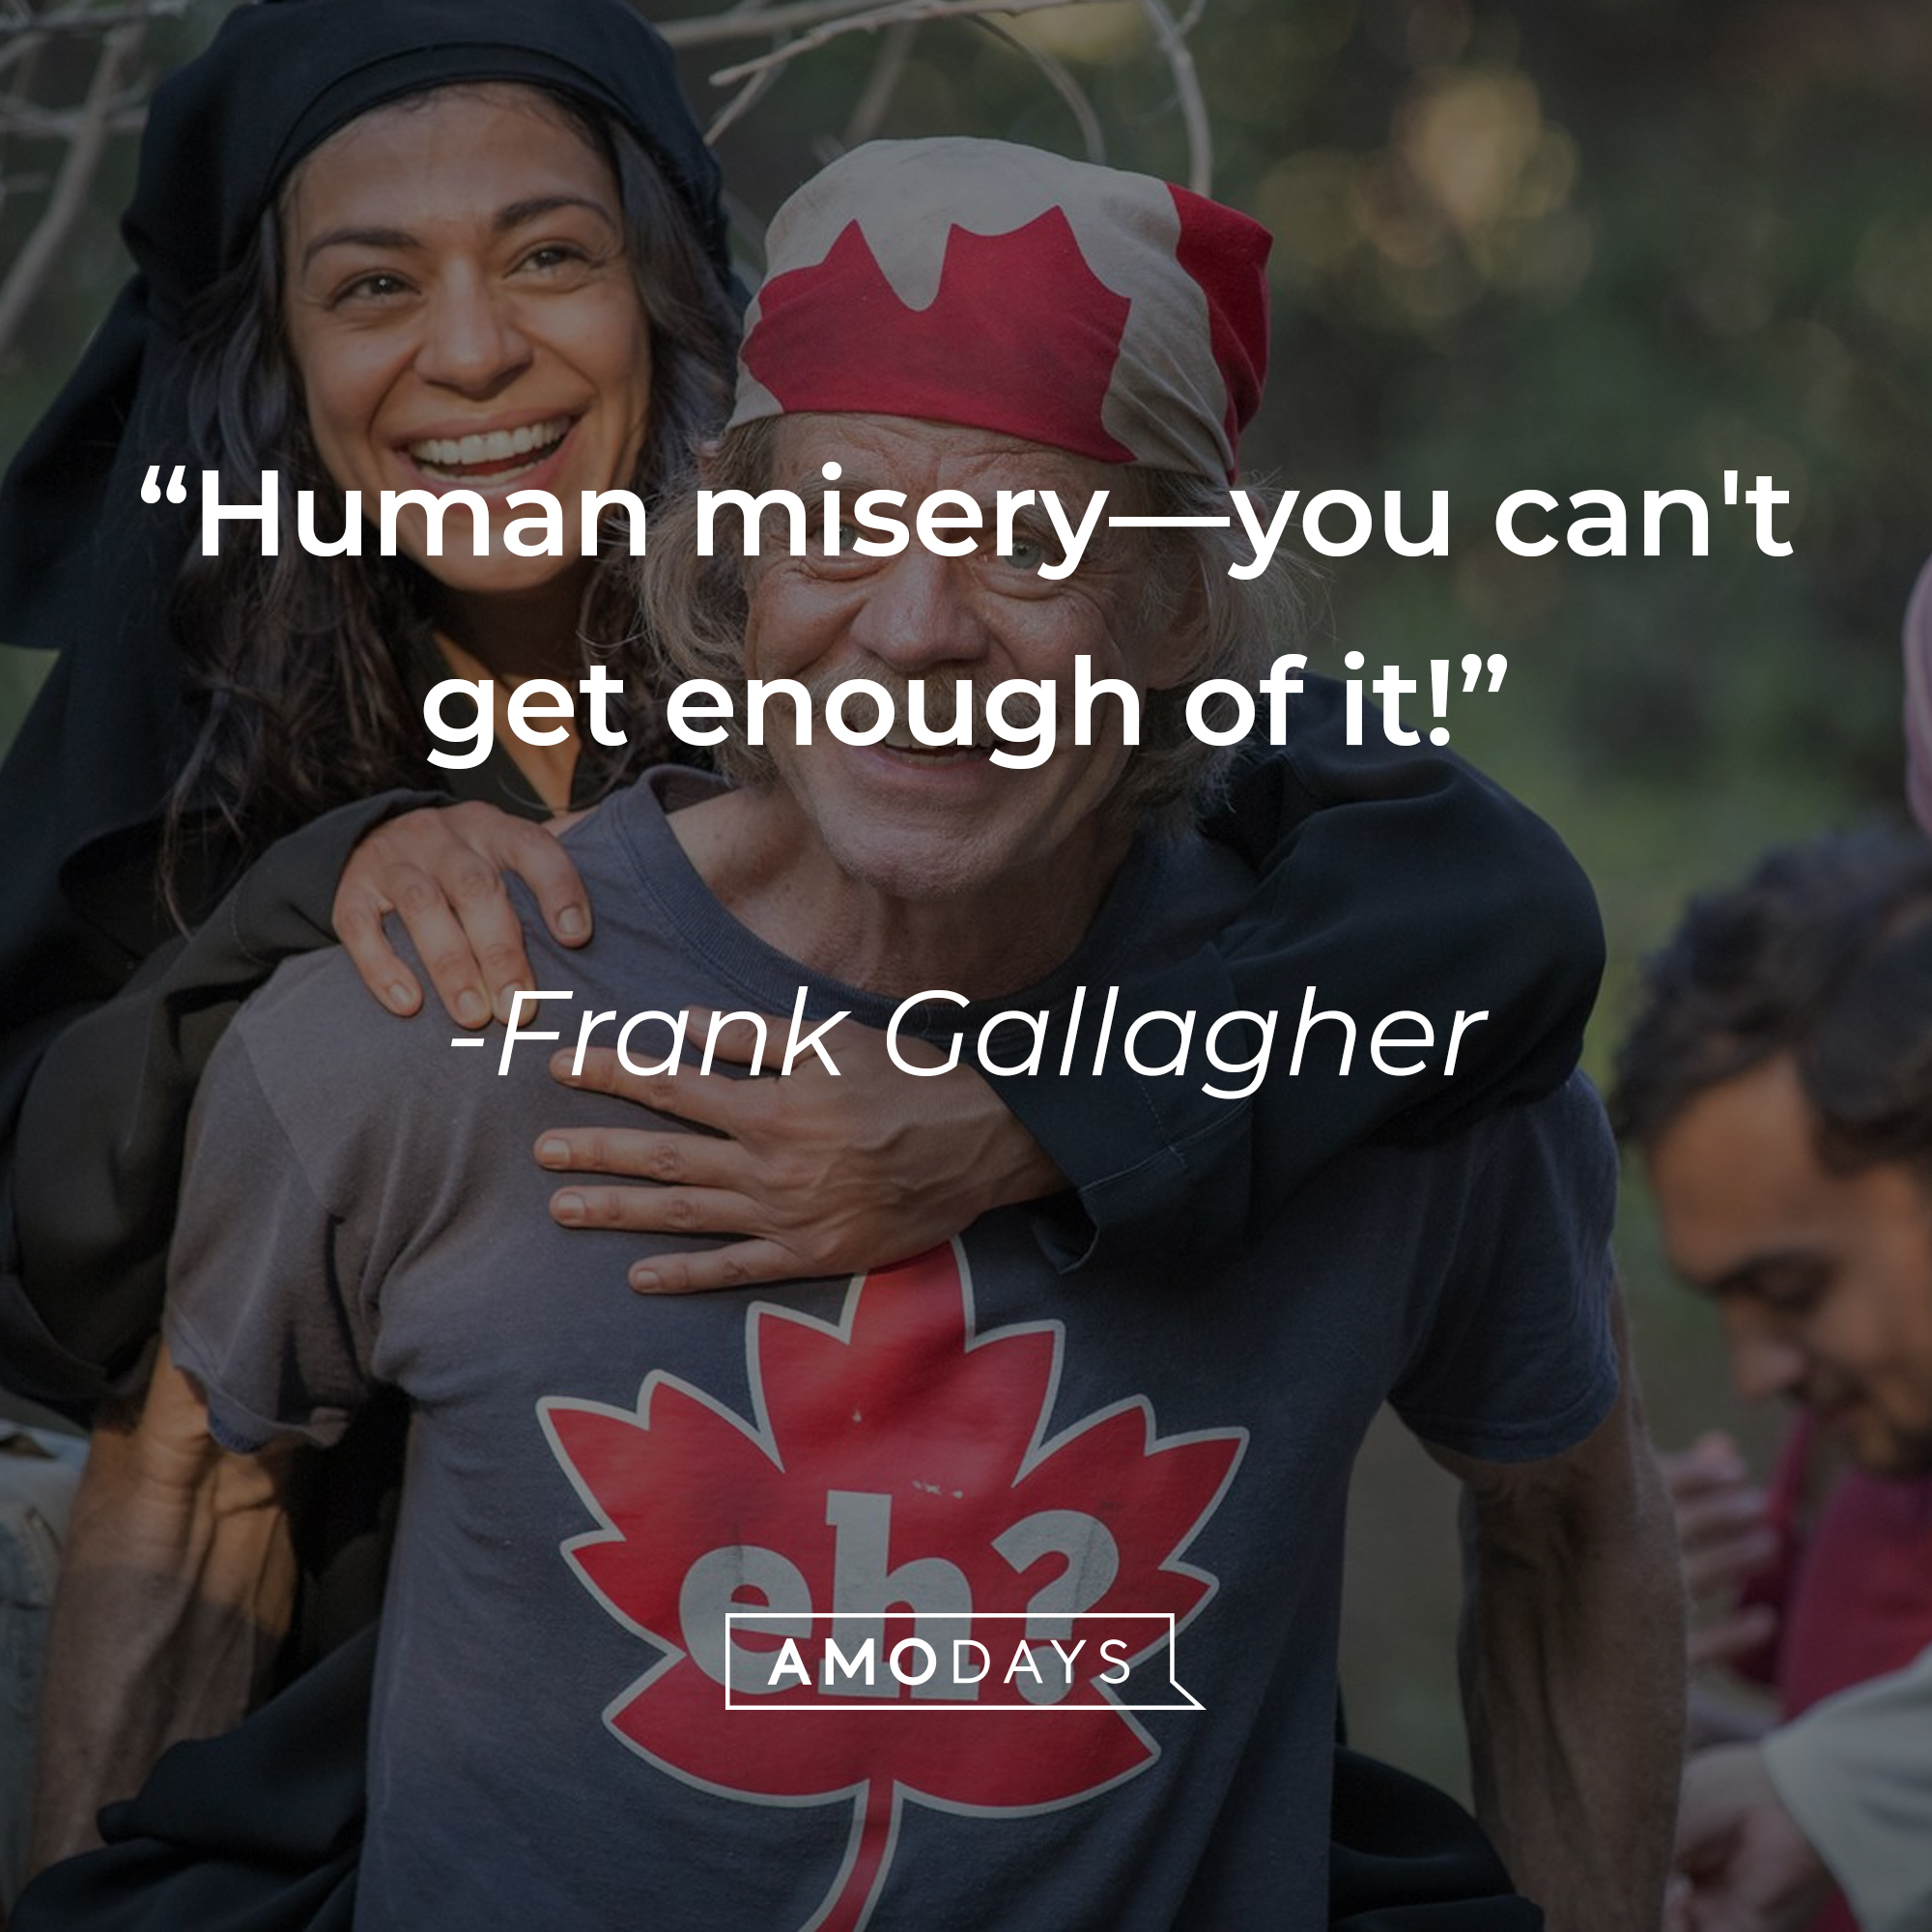 Frank Gallagher's quote: "Human misery—you can't get enough of it!" | Source: facebook.com/ShamelessOnShowtime